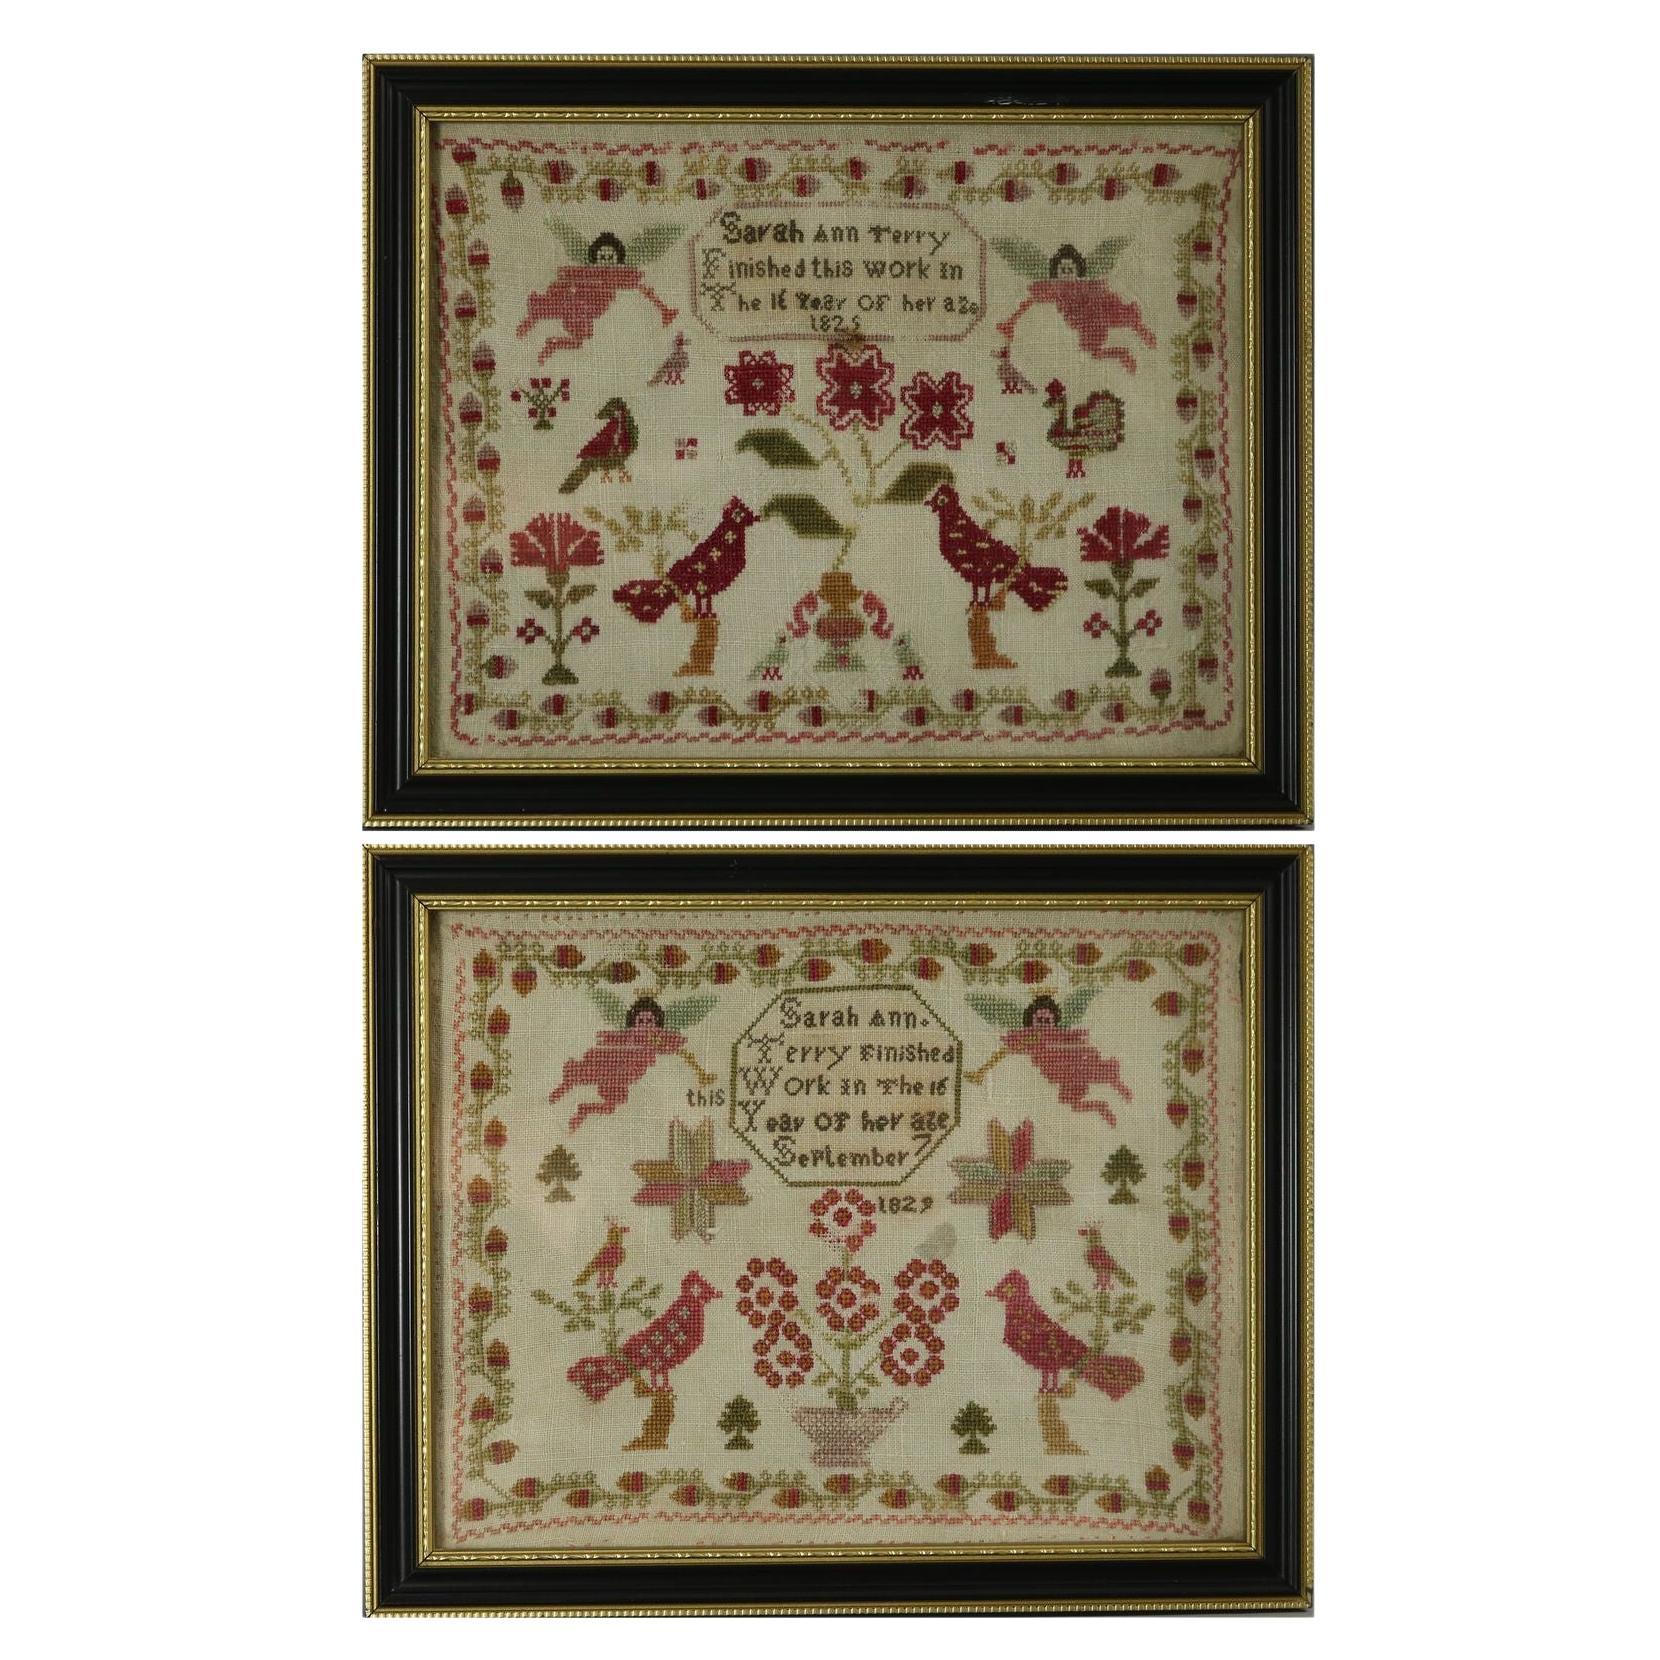 Pair Antique Samplers, 1825 and 1829, by Sarah Ann Terry